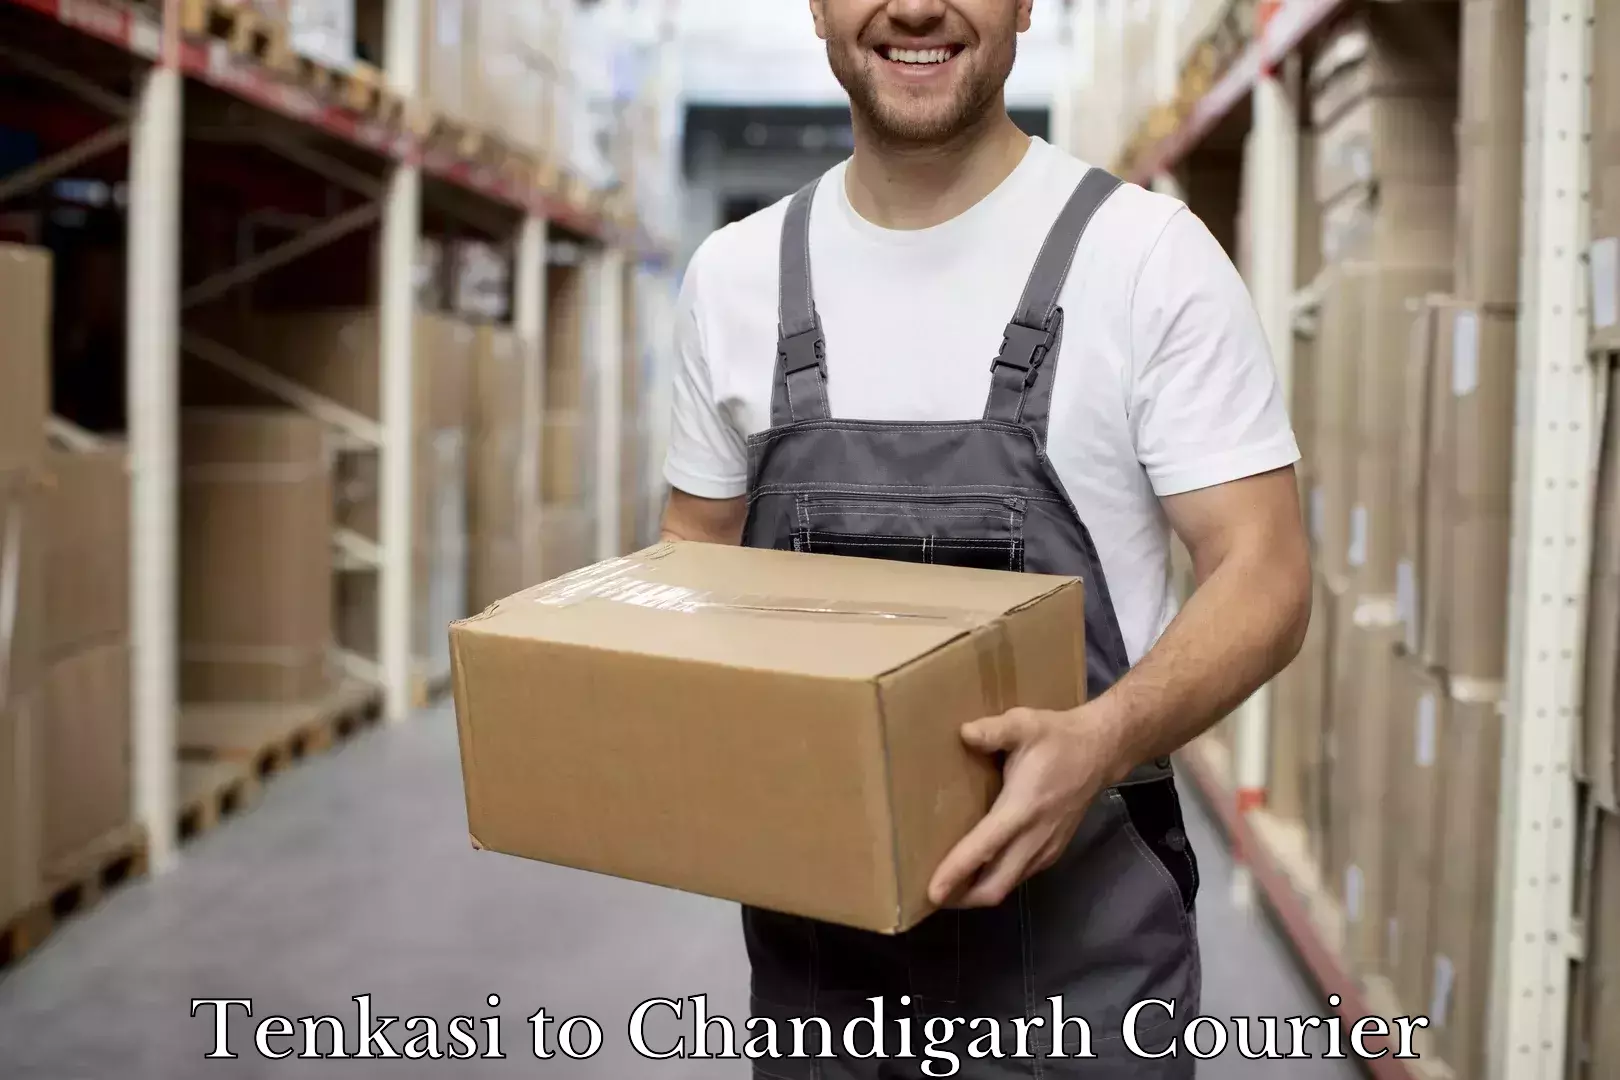 Luggage delivery providers Tenkasi to Chandigarh